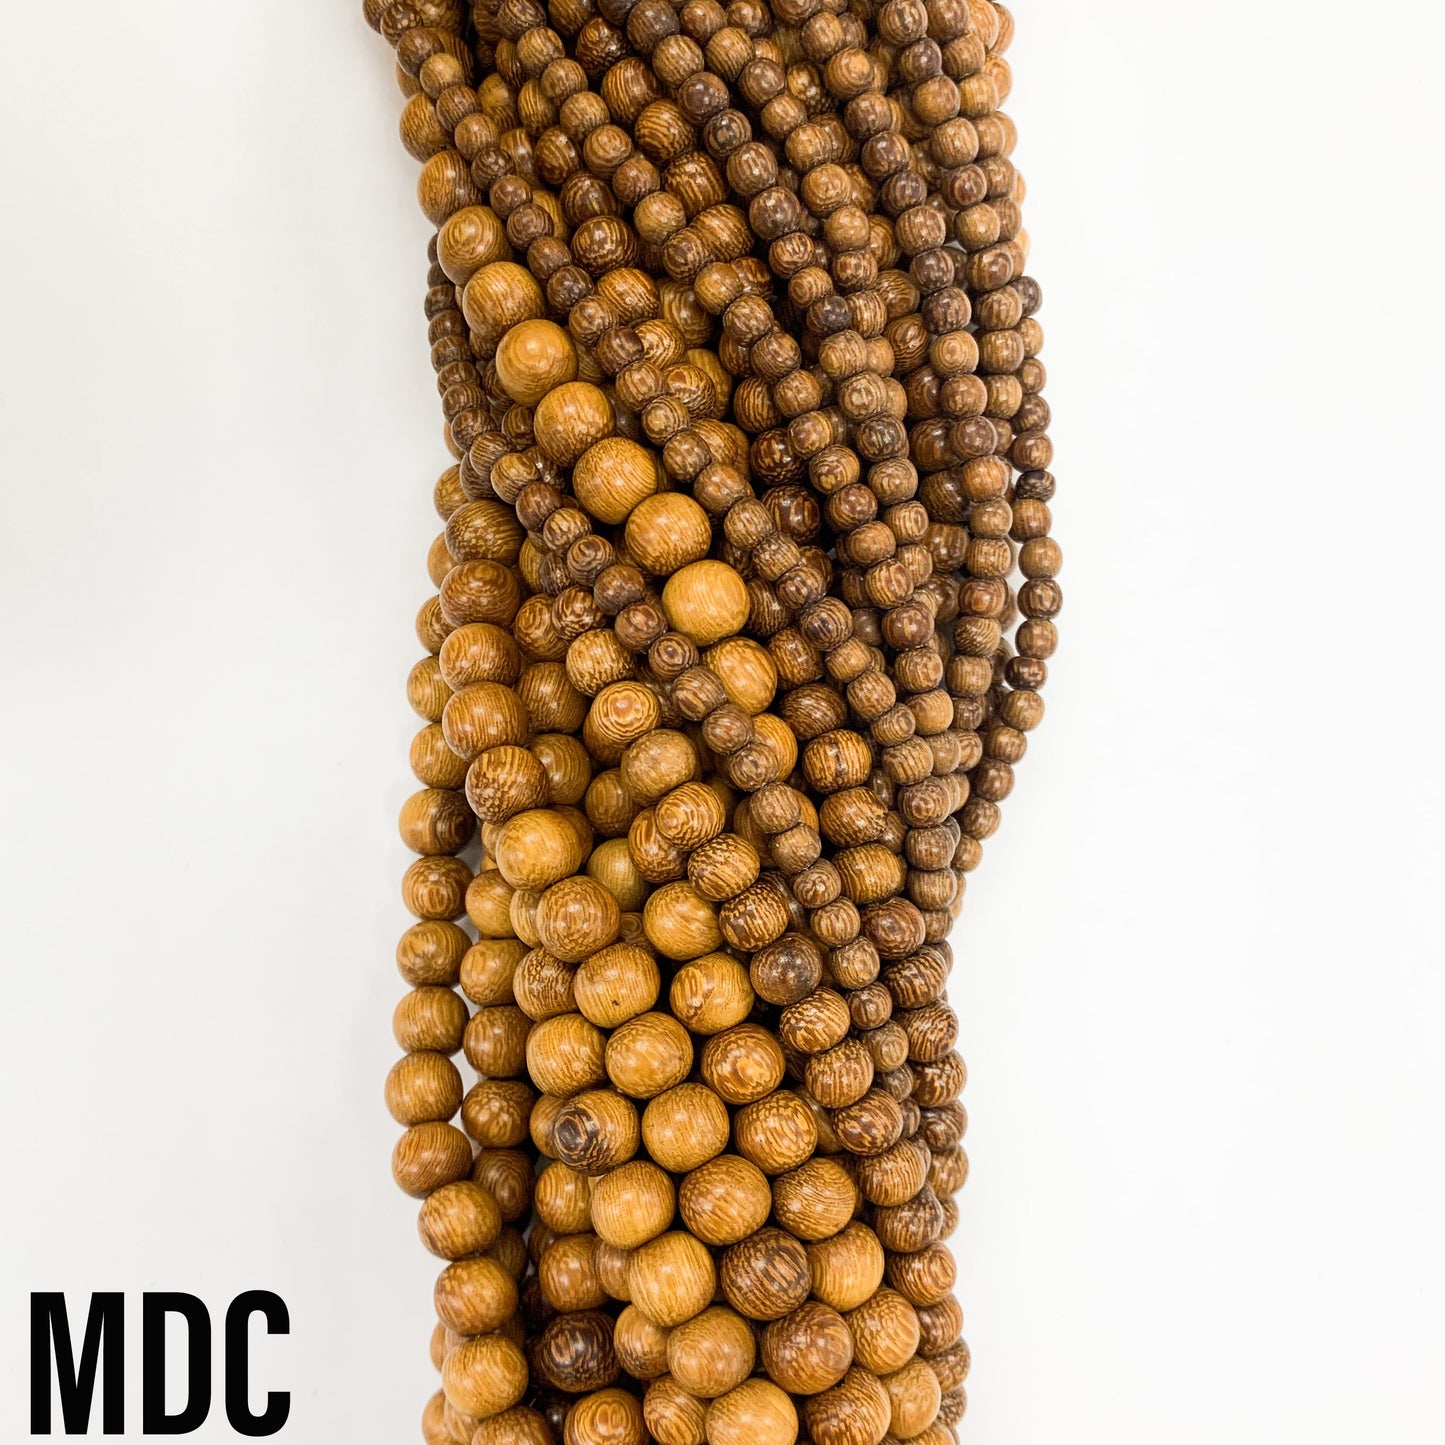 Madre De Cacao Wood Beads 10mm